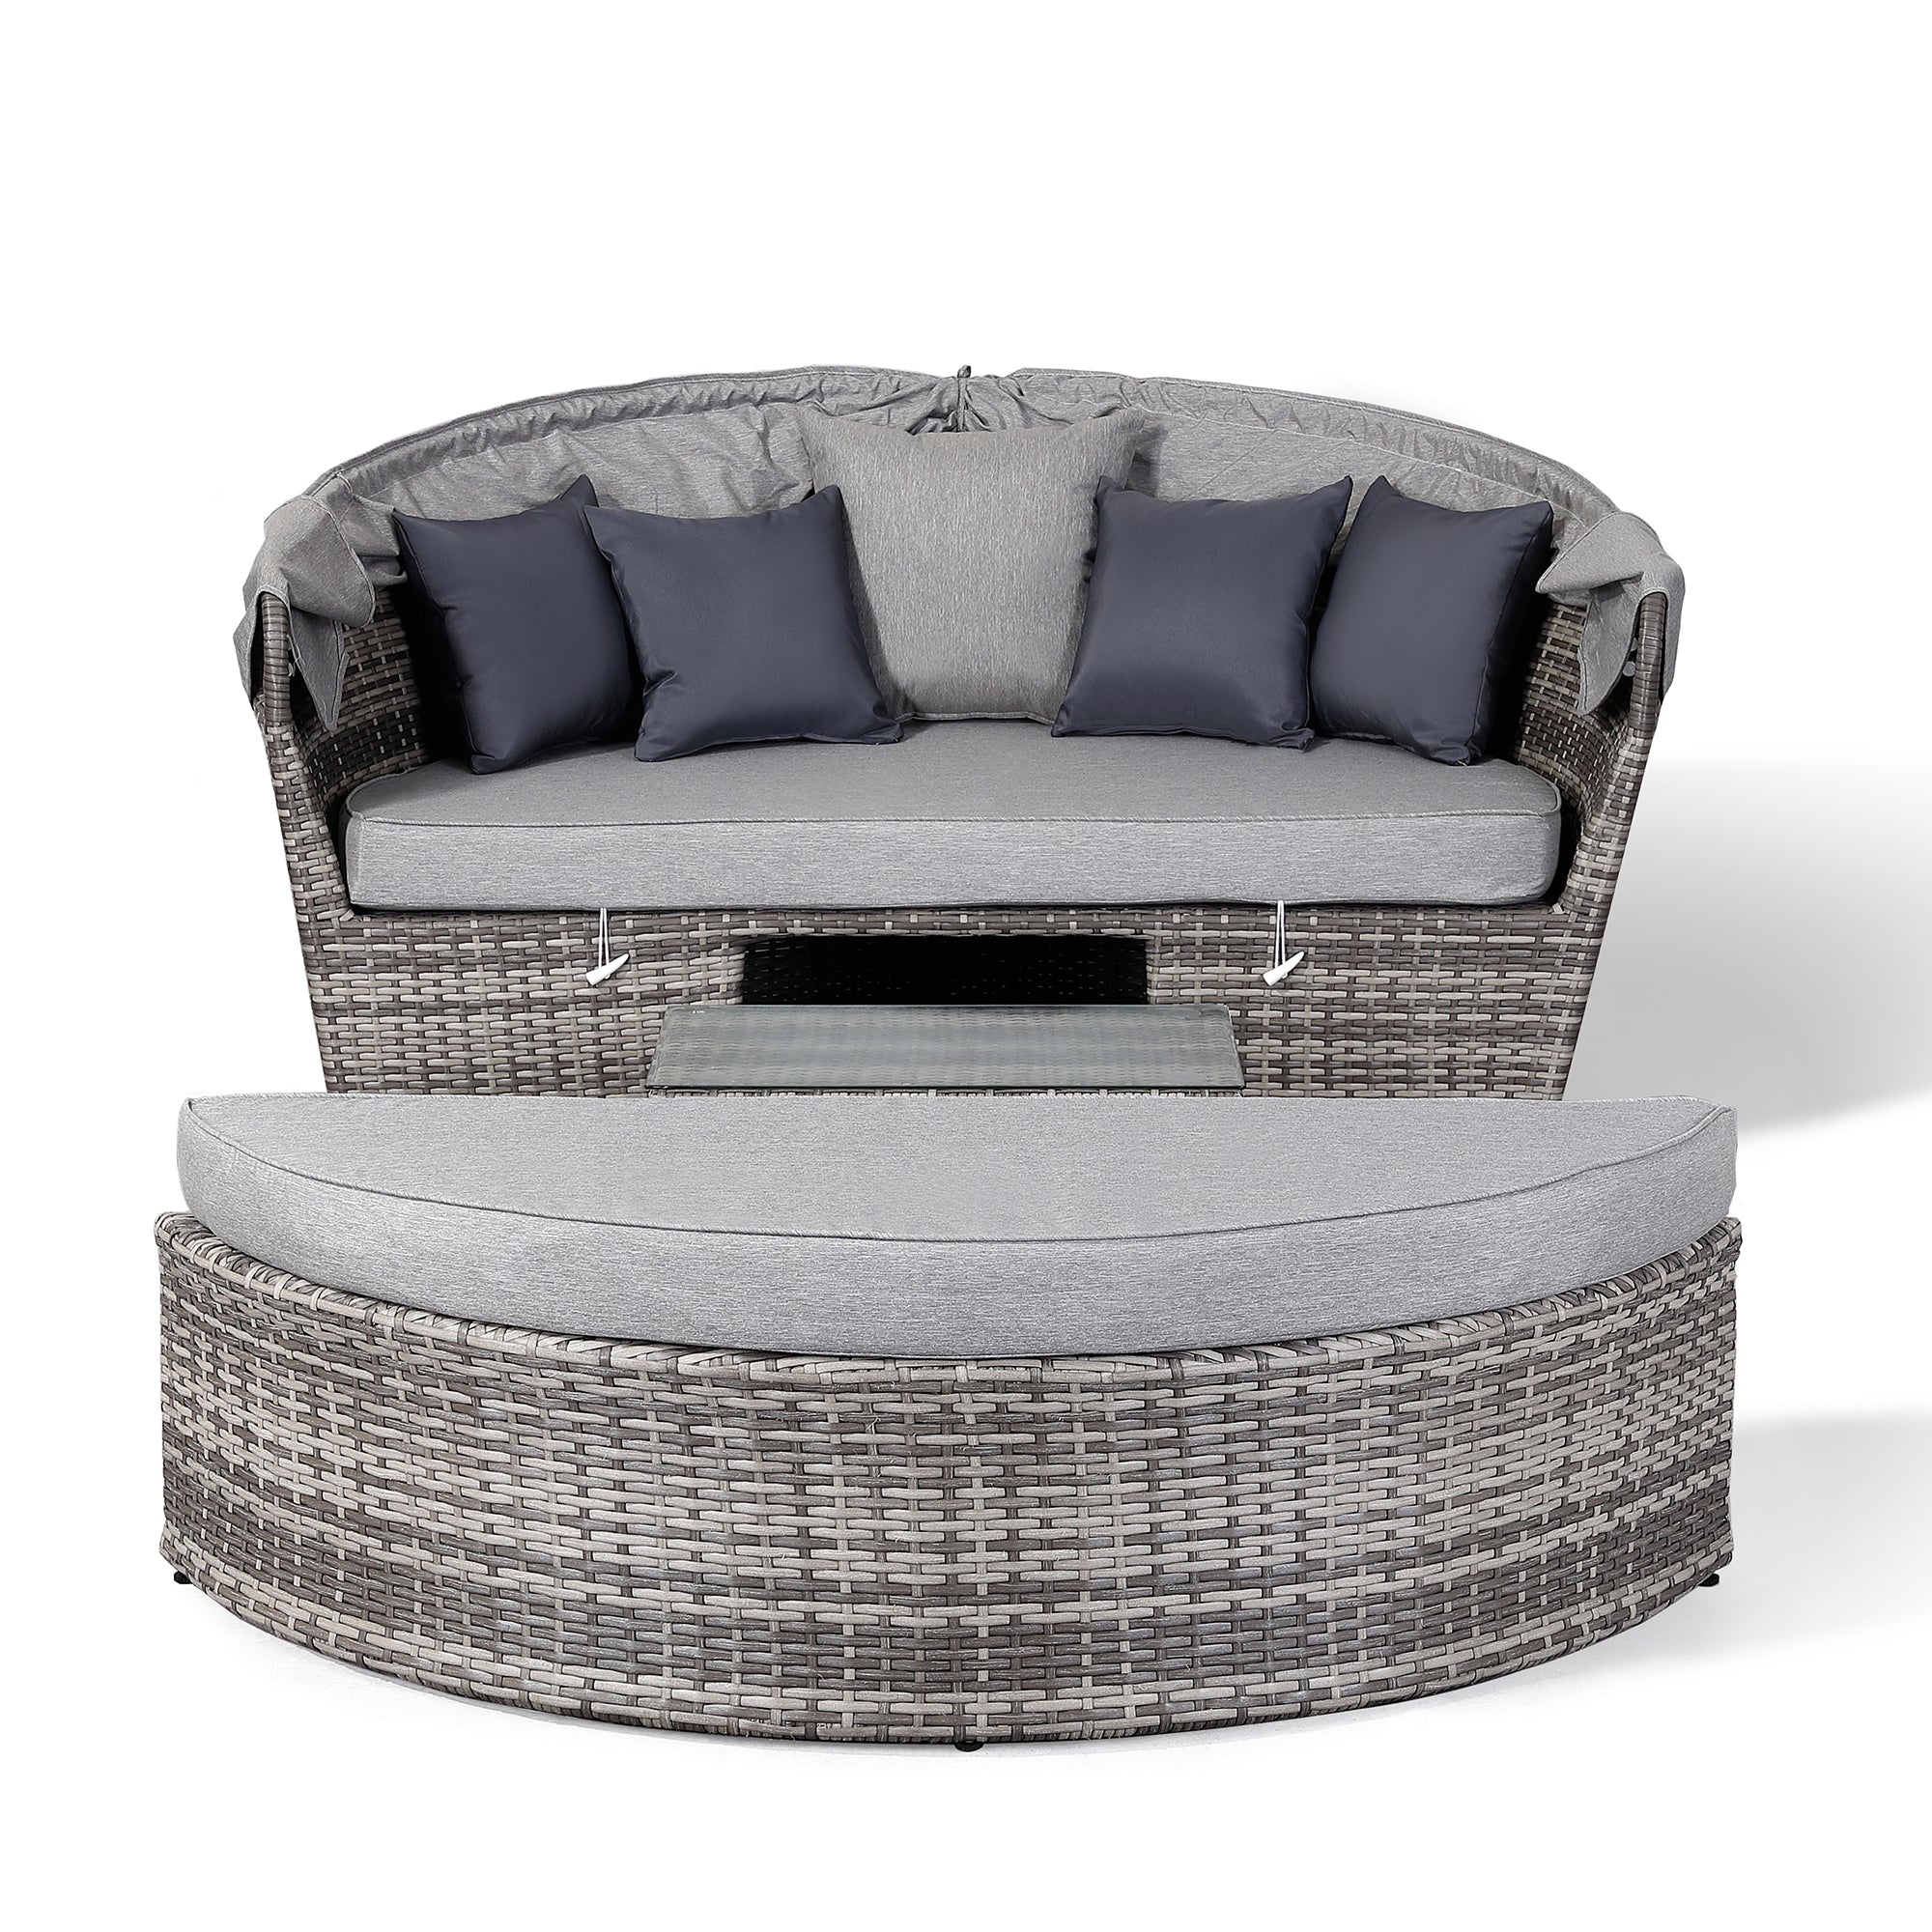 Cambridge Range Daybed with Canopy in Stone Browne Grey Weave and Grey Cushions